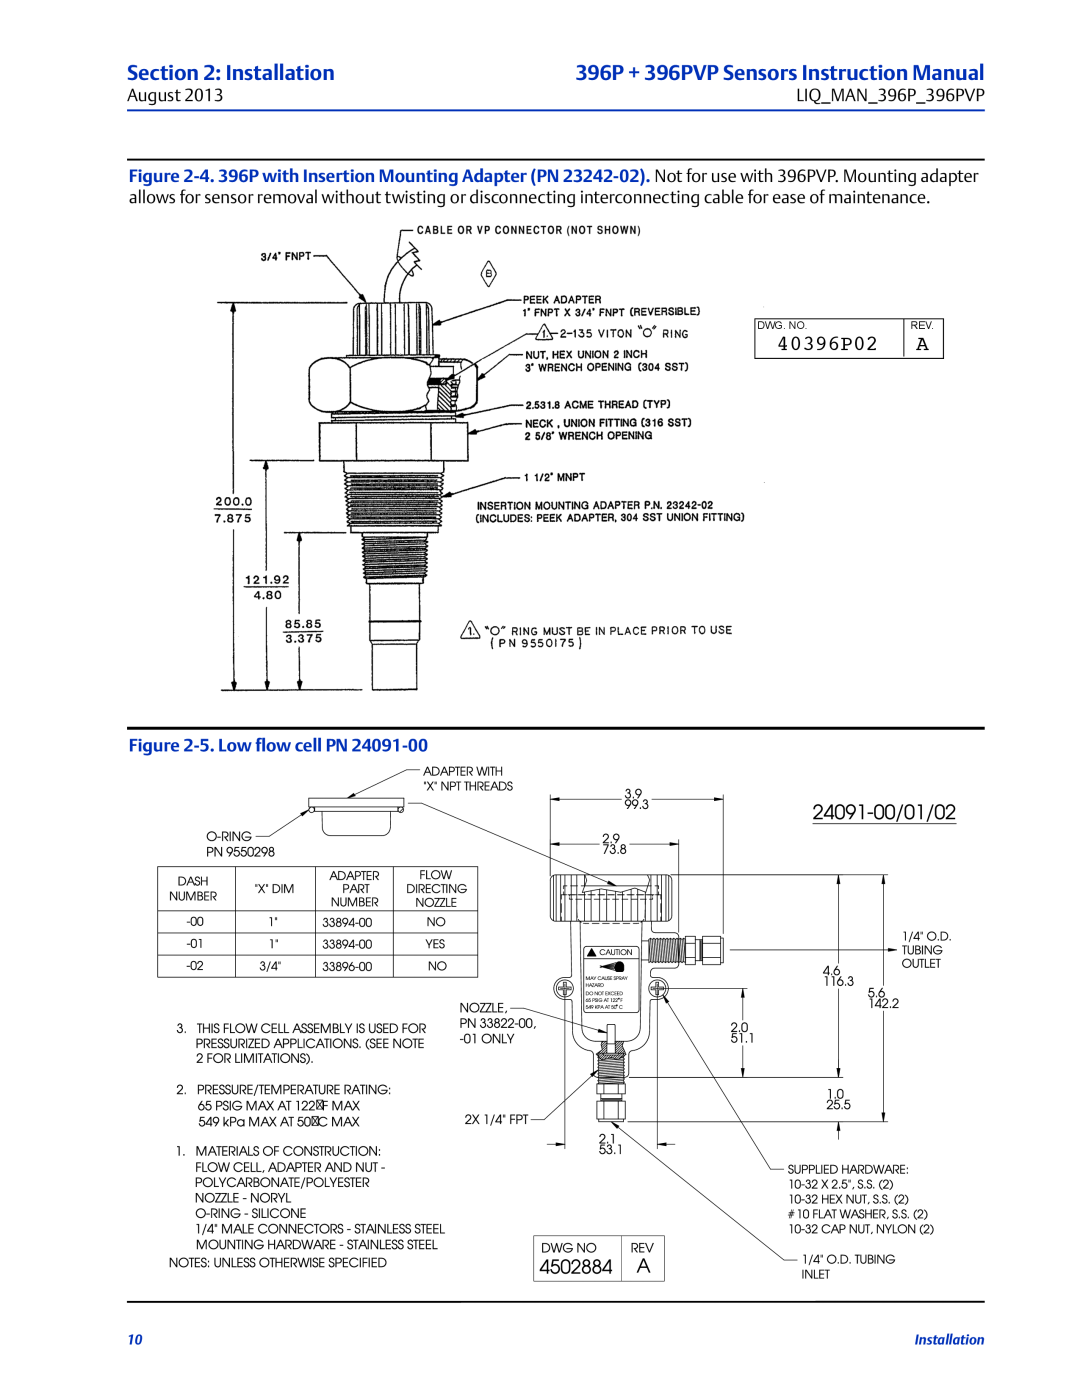 Emerson 396PVP instruction manual 40396P02, 5.Low flow cell PN, Installation 